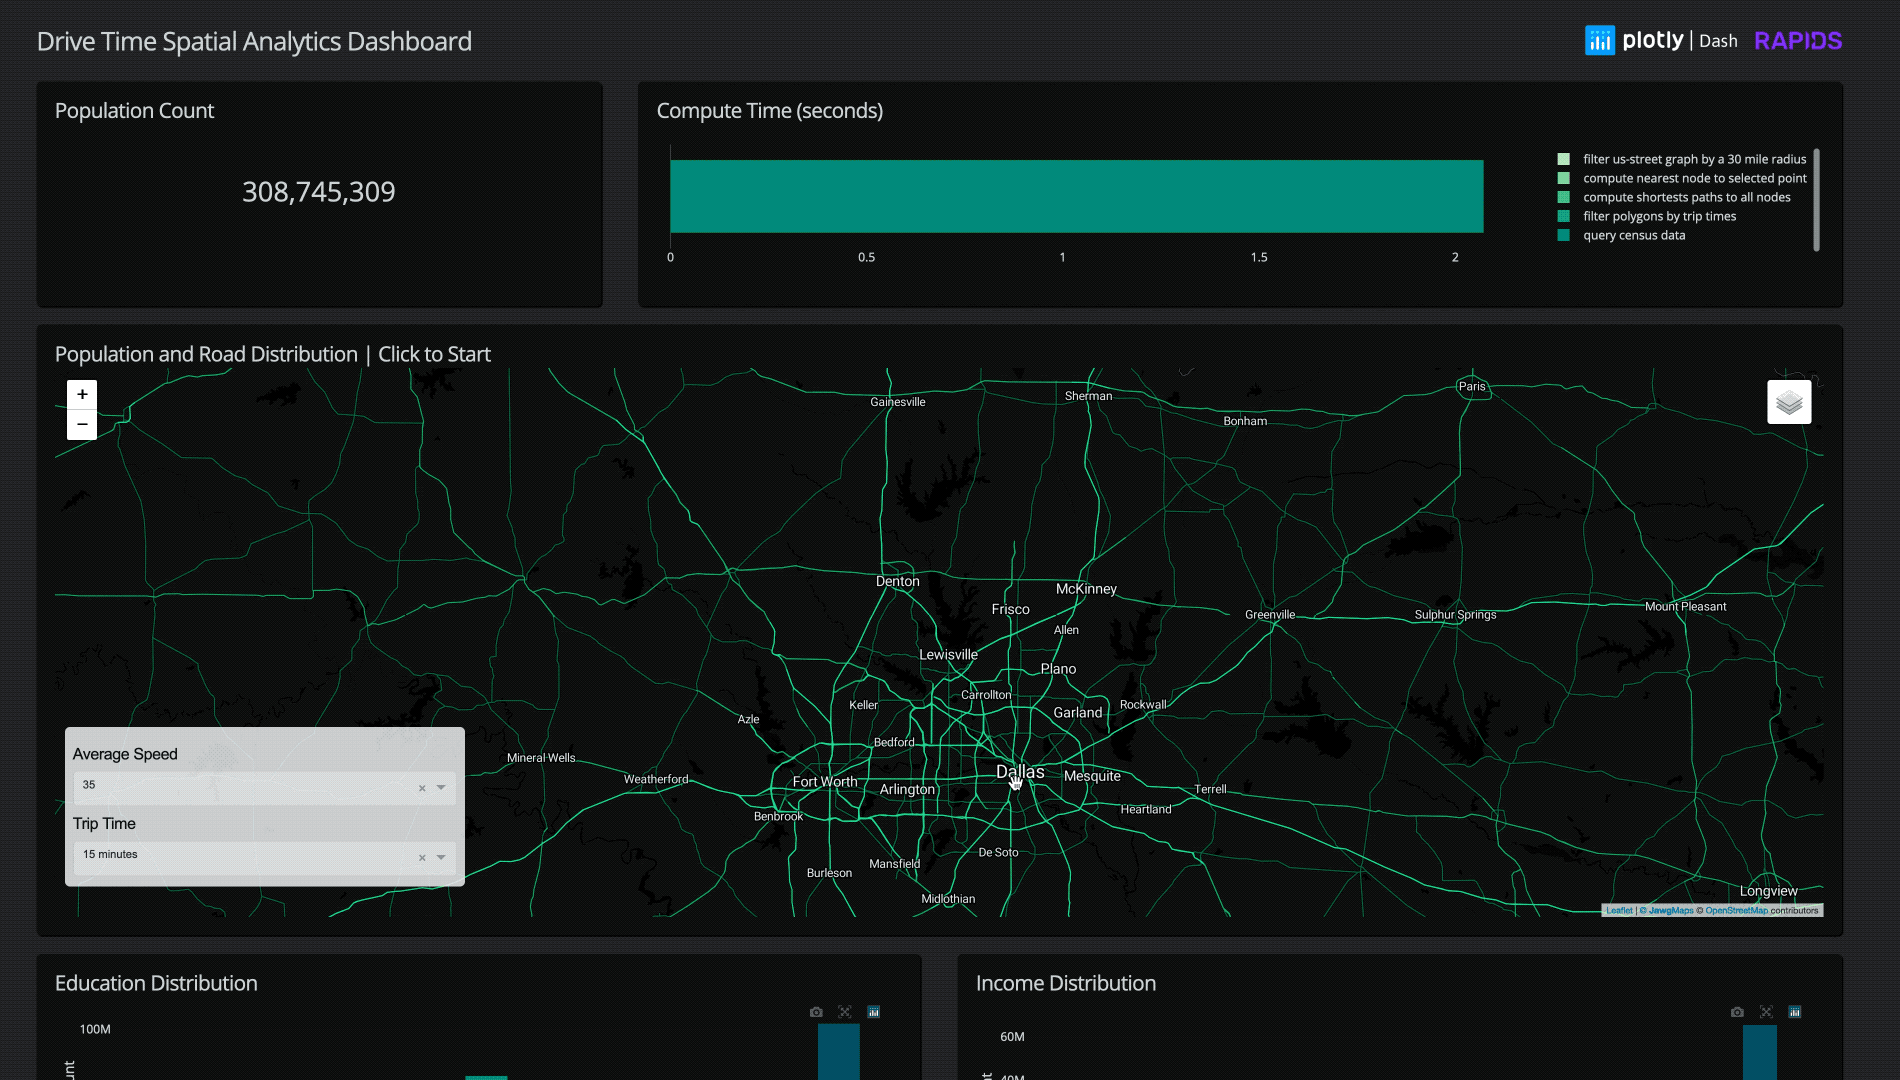 Interactive dashboard in Plotly Dash to Interactively Visualizing a Drive Time Radius from Any Point in the US